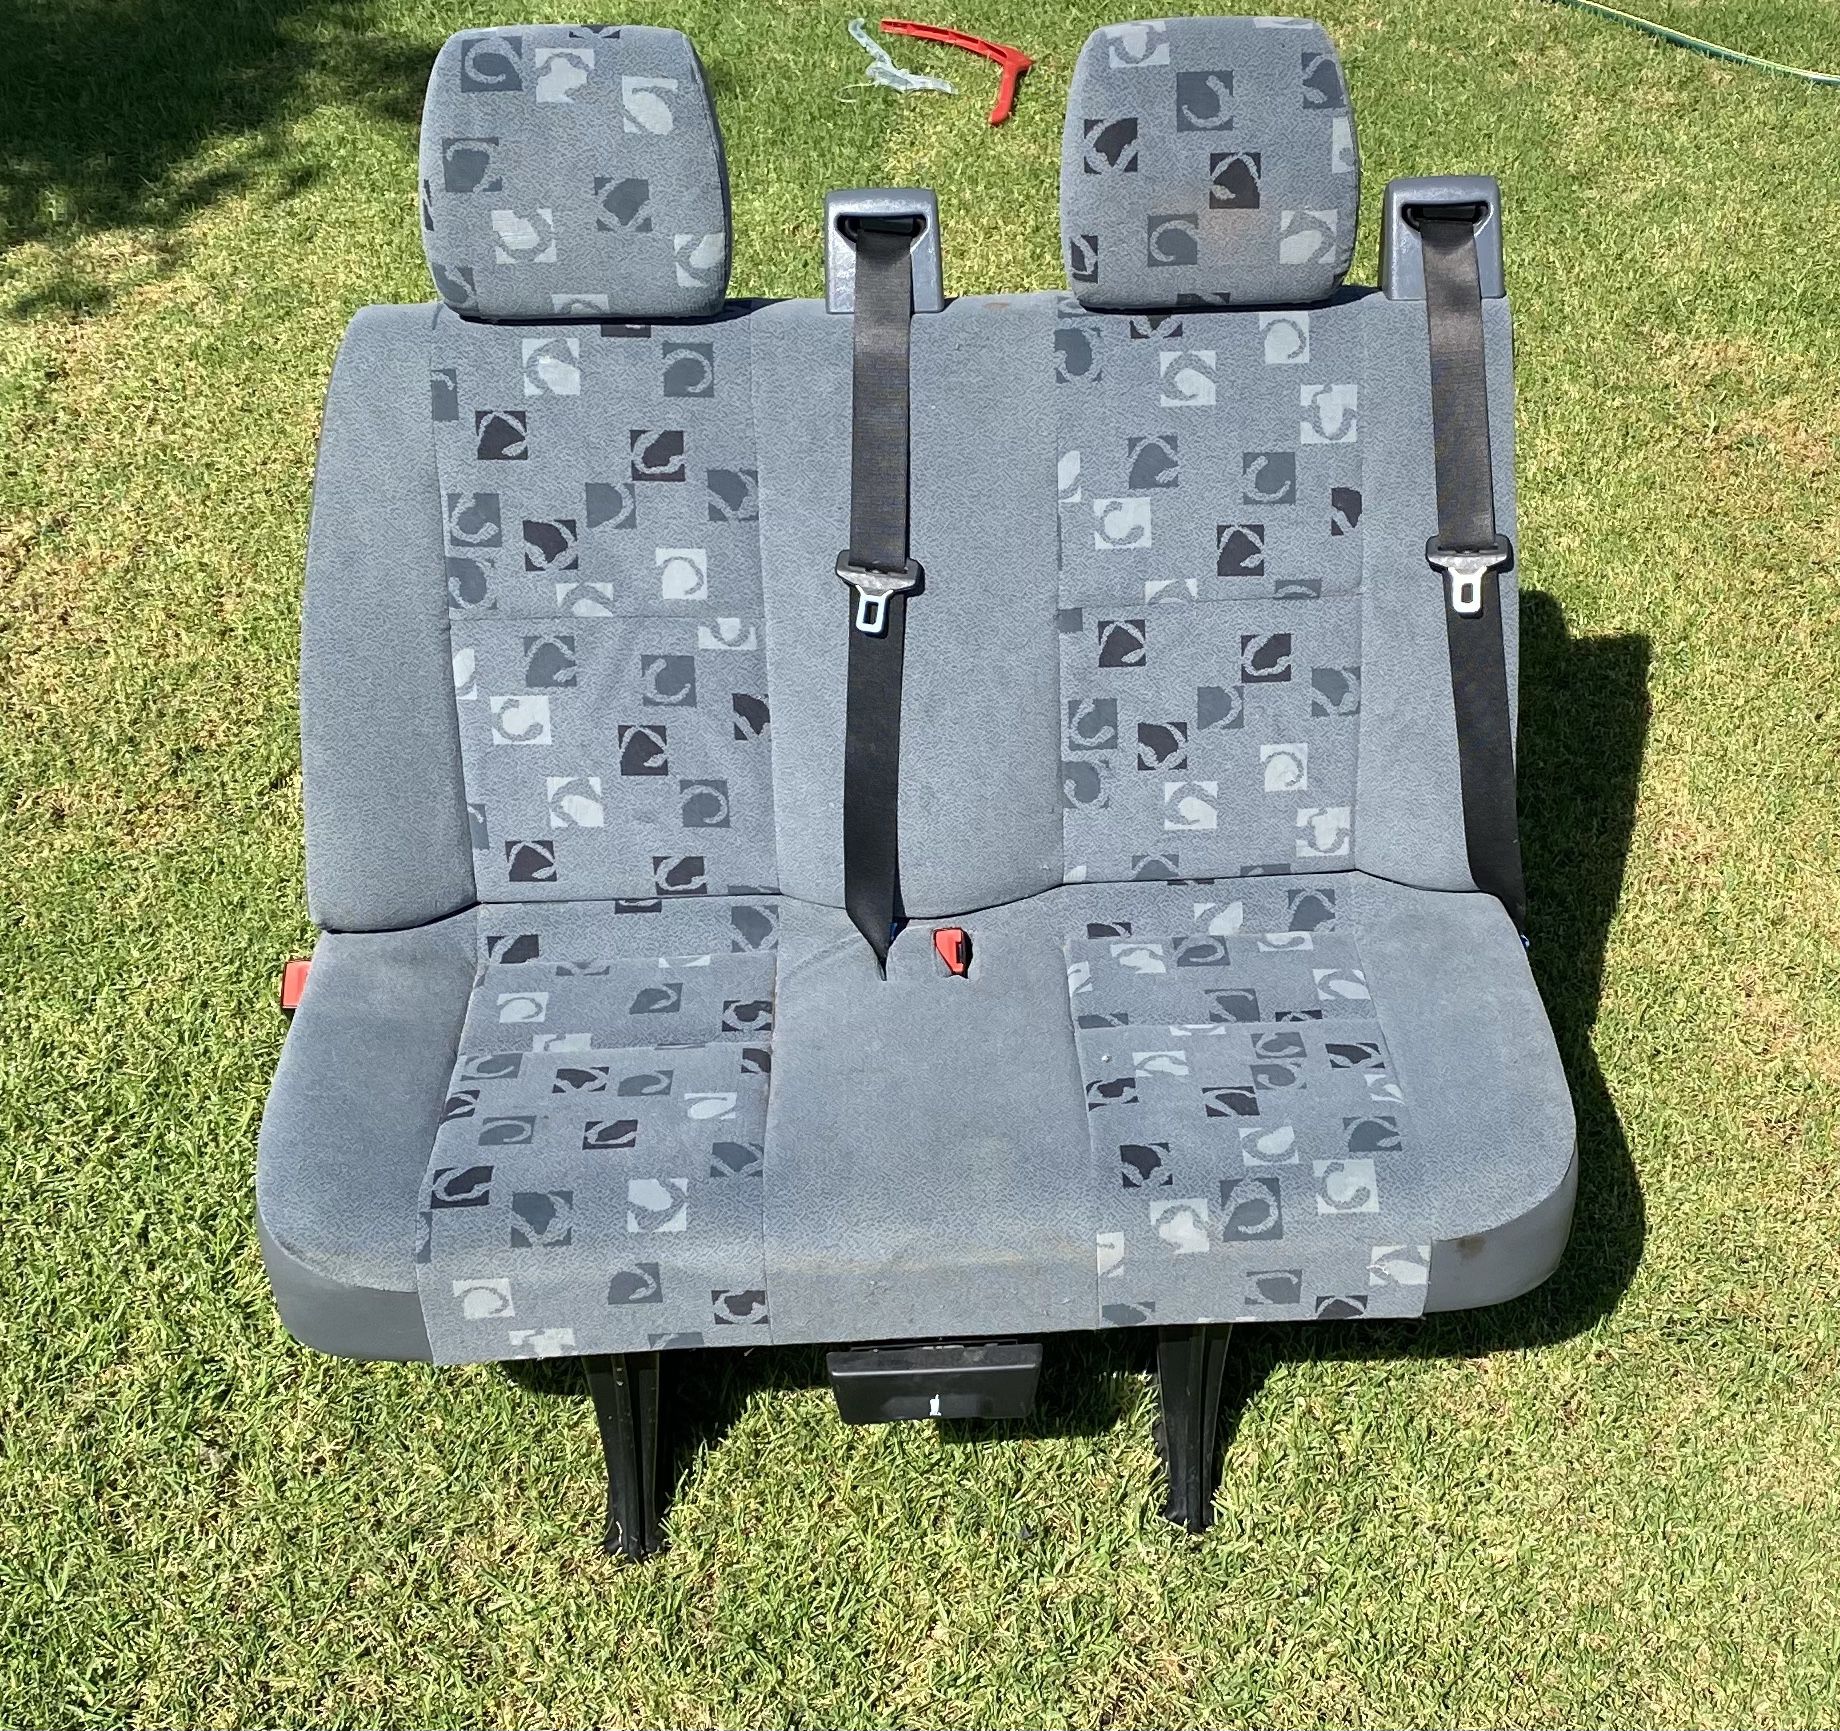 Double seater for Sprinter Vans